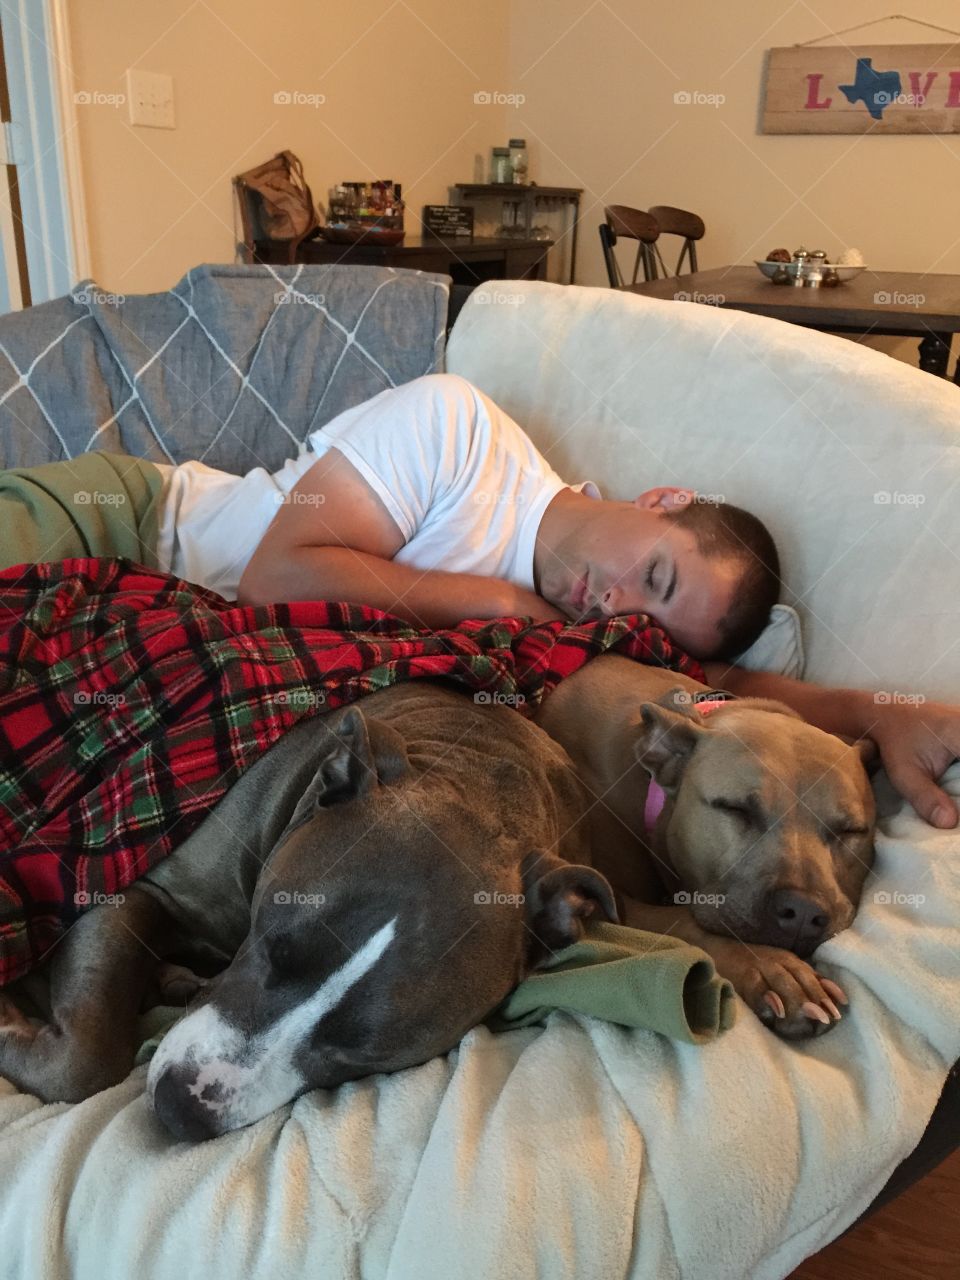 Nap time buddies . After a long day of play with new pups. 